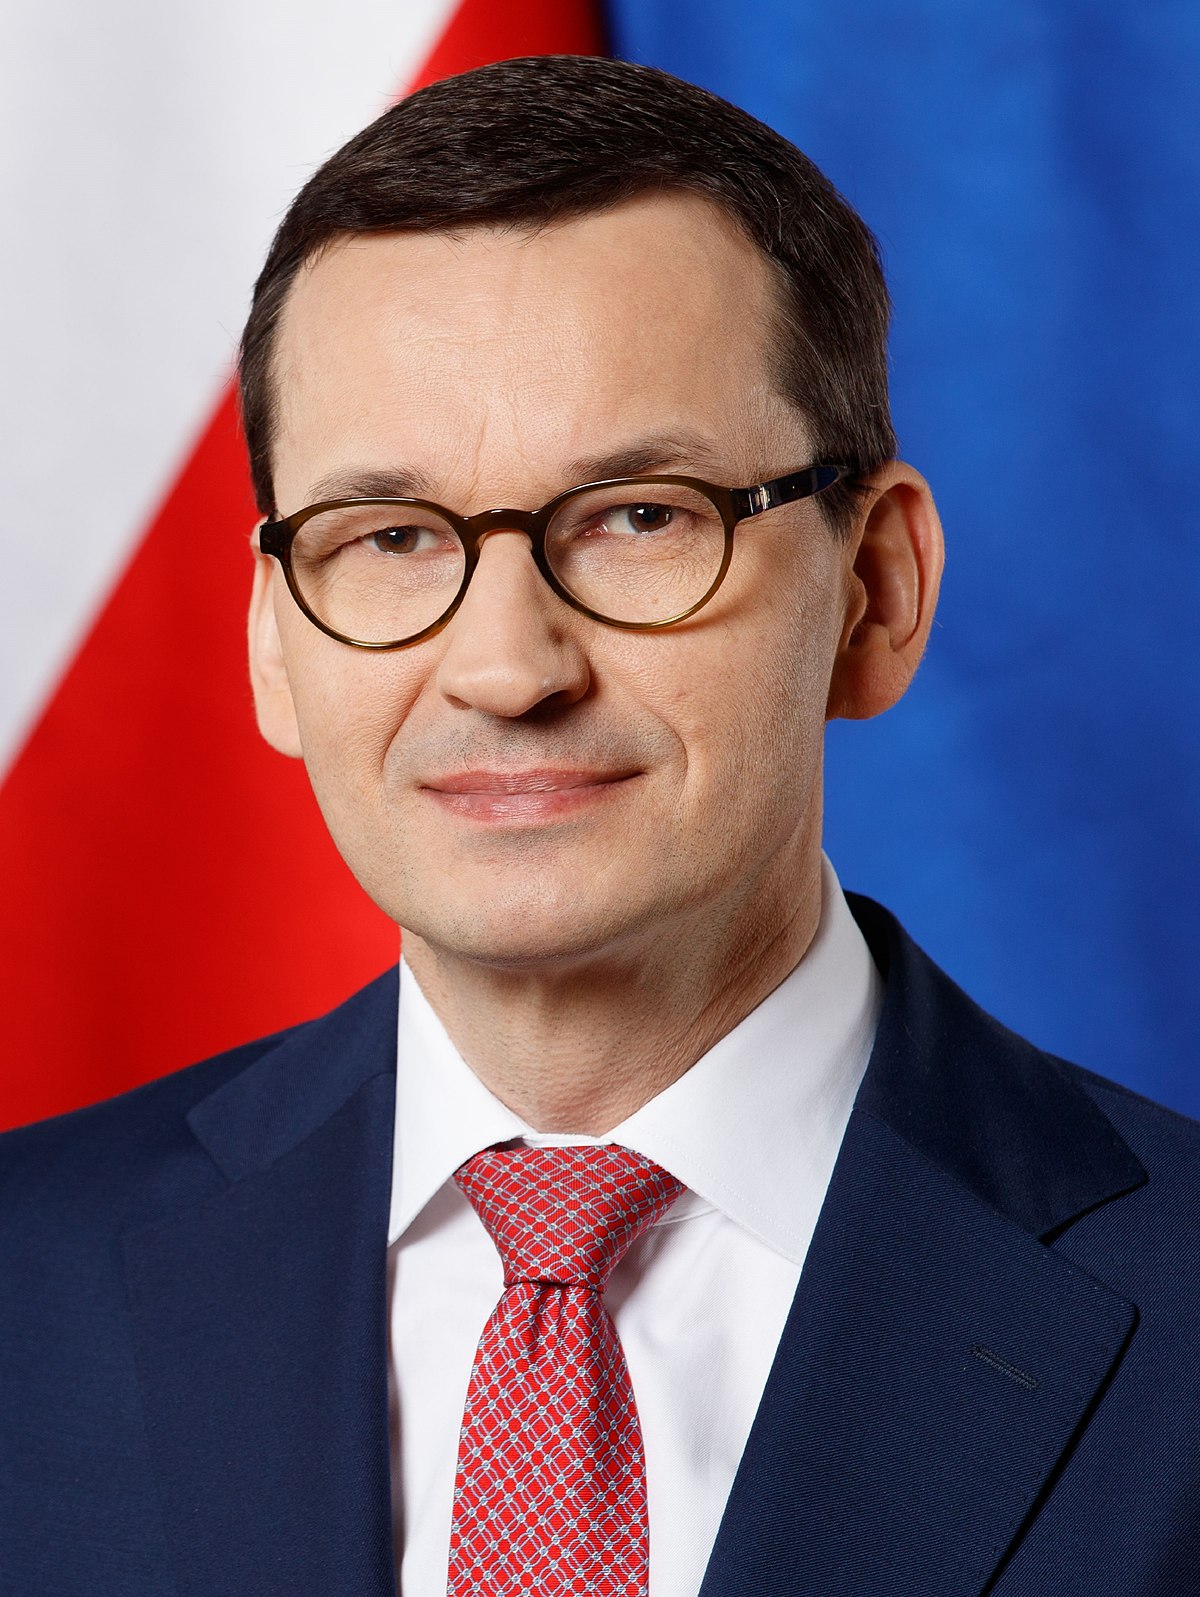 Poland to boost ammunition production, says PM